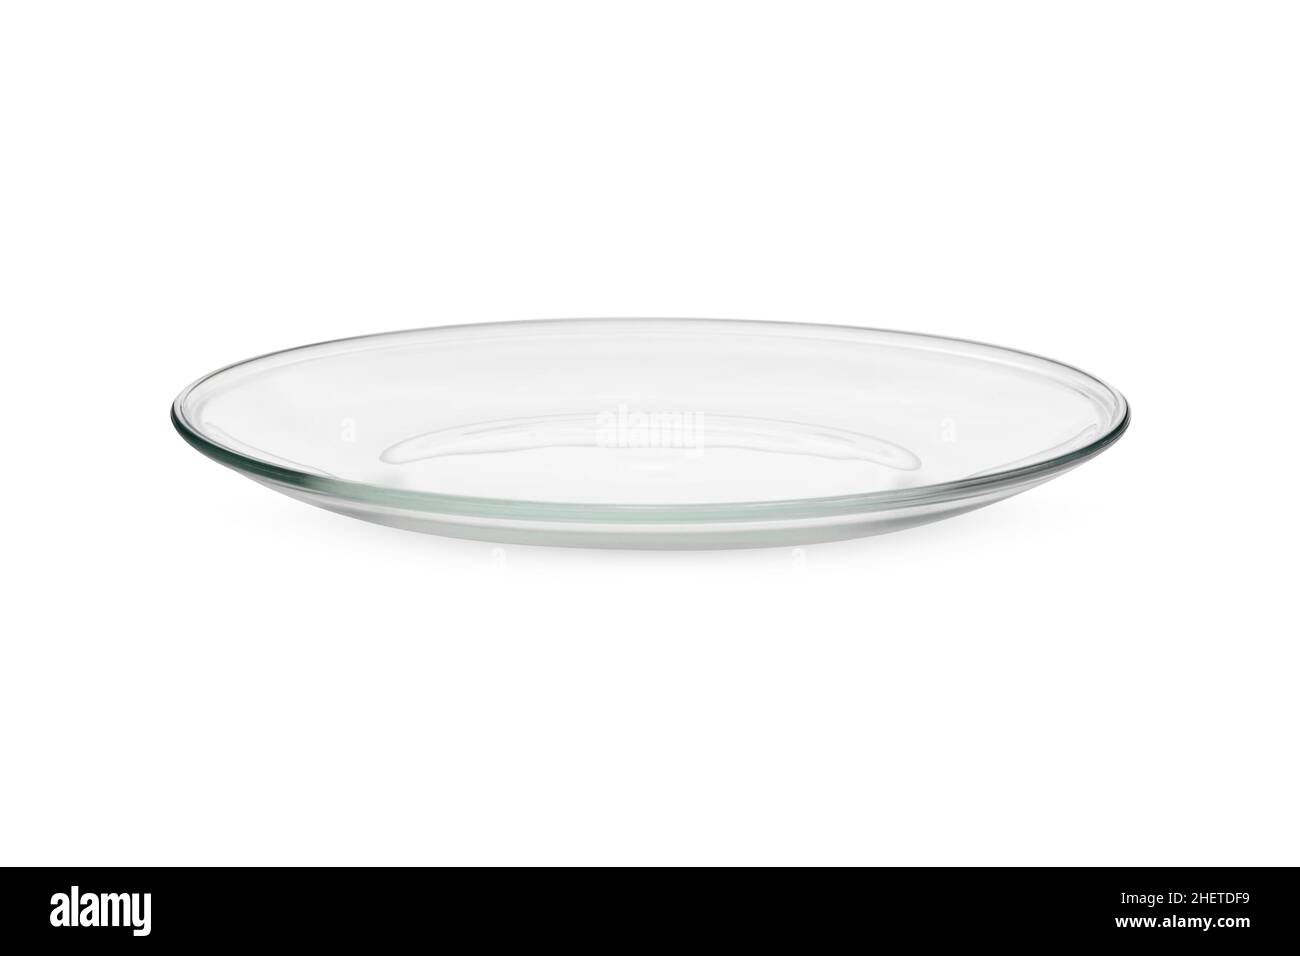 https://c8.alamy.com/comp/2HETDF9/glass-bowl-or-plate-isolated-on-white-background-close-up-view-of-an-empty-transparent-cup-glass-plate-3d-rendering-model-mixing-bowl-glossy-dish-2HETDF9.jpg